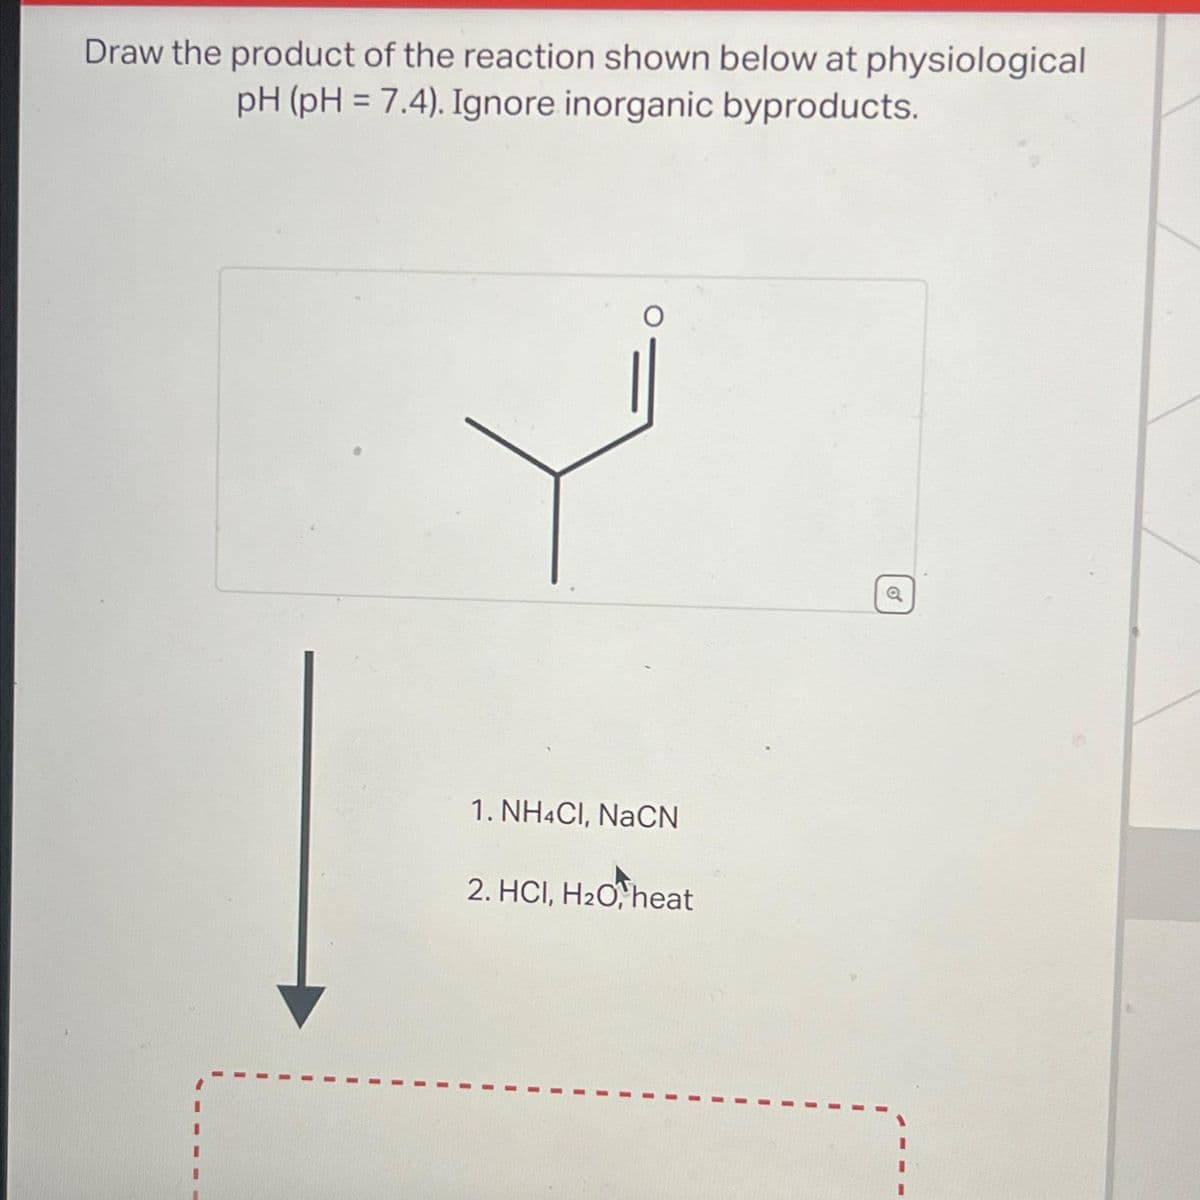 Draw the product of the reaction shown below at physiological
pH (pH = 7.4). Ignore inorganic byproducts.
I
1. NH4Cl, NaCN
2. HCI, H₂O, heat
I
I
I
Q